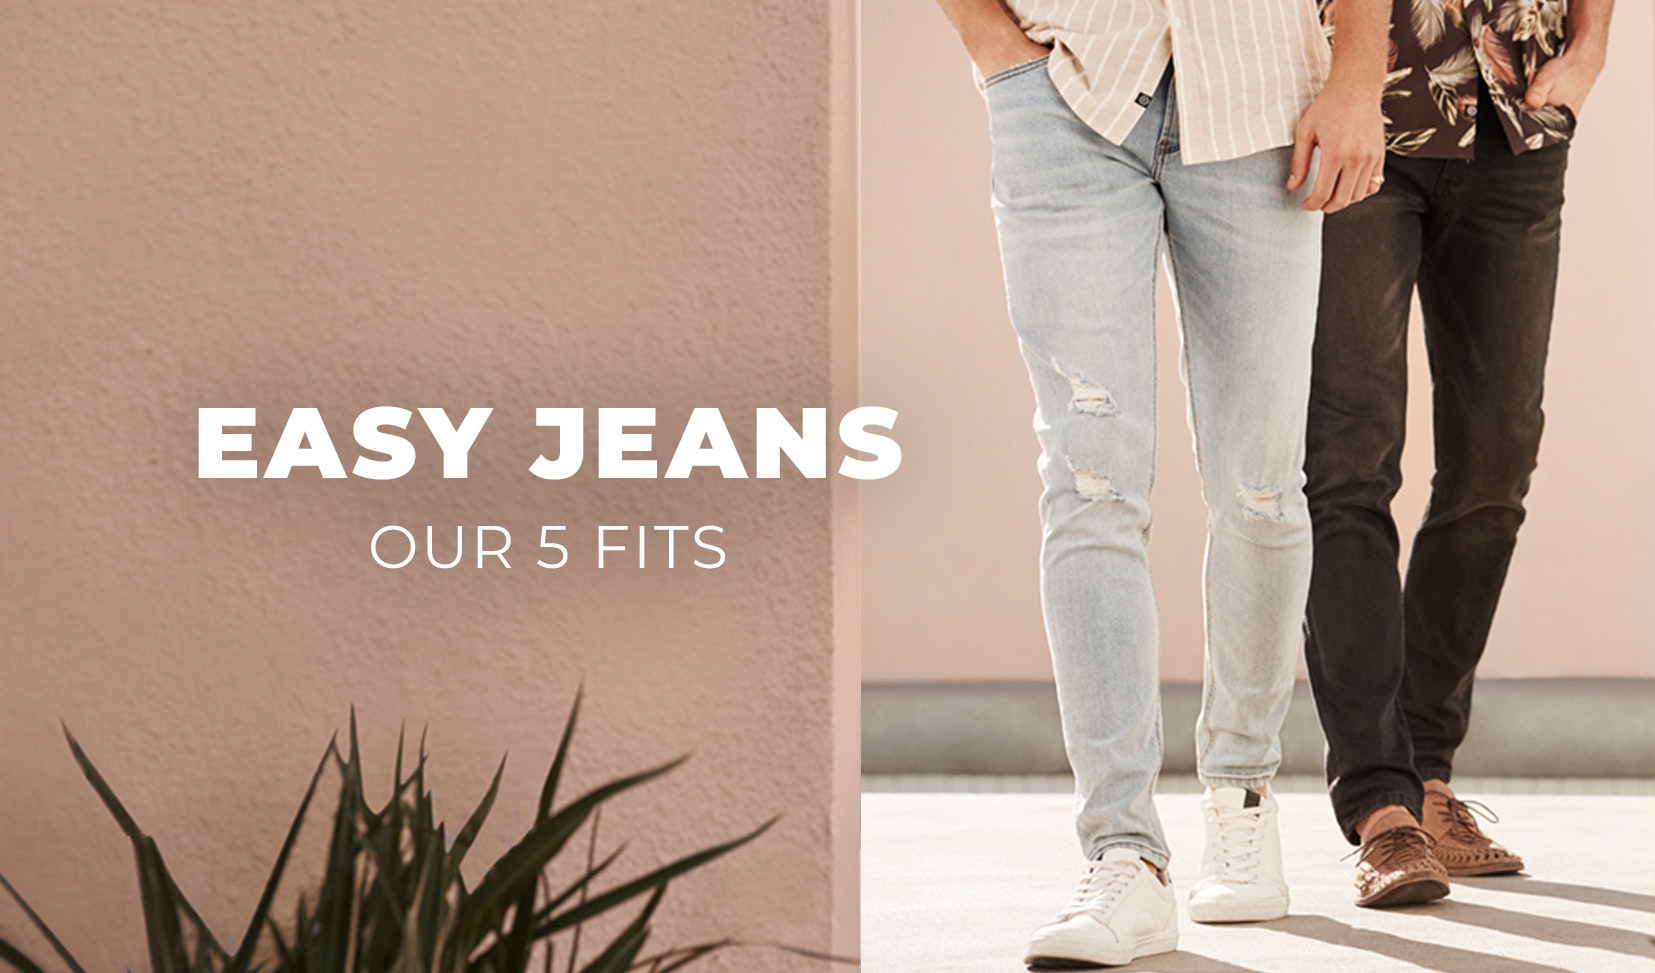 Easy Jeans Our 5 Fits